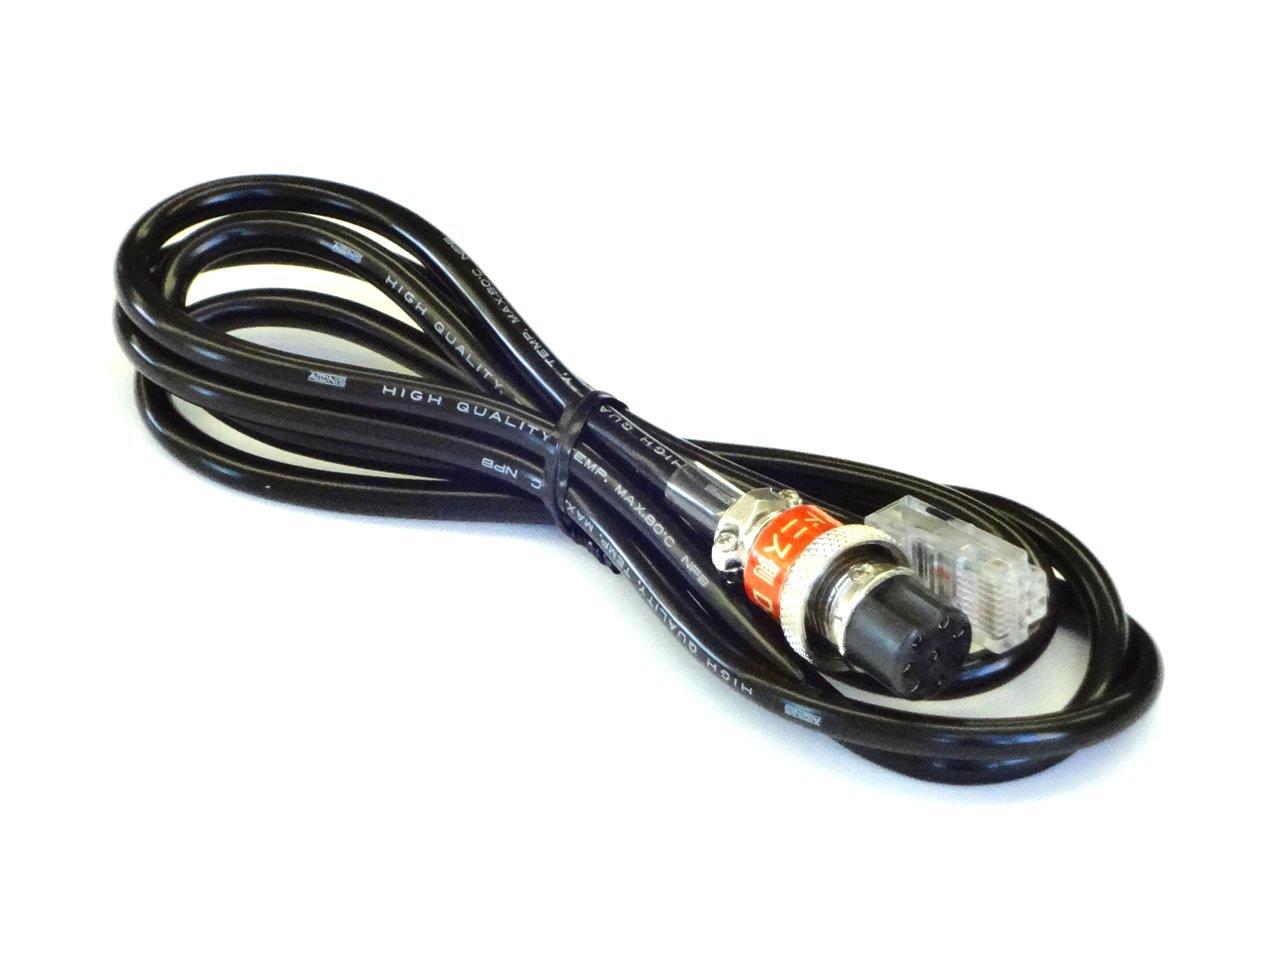 Adonis D-8mi Connecting Cable for Icom Radio